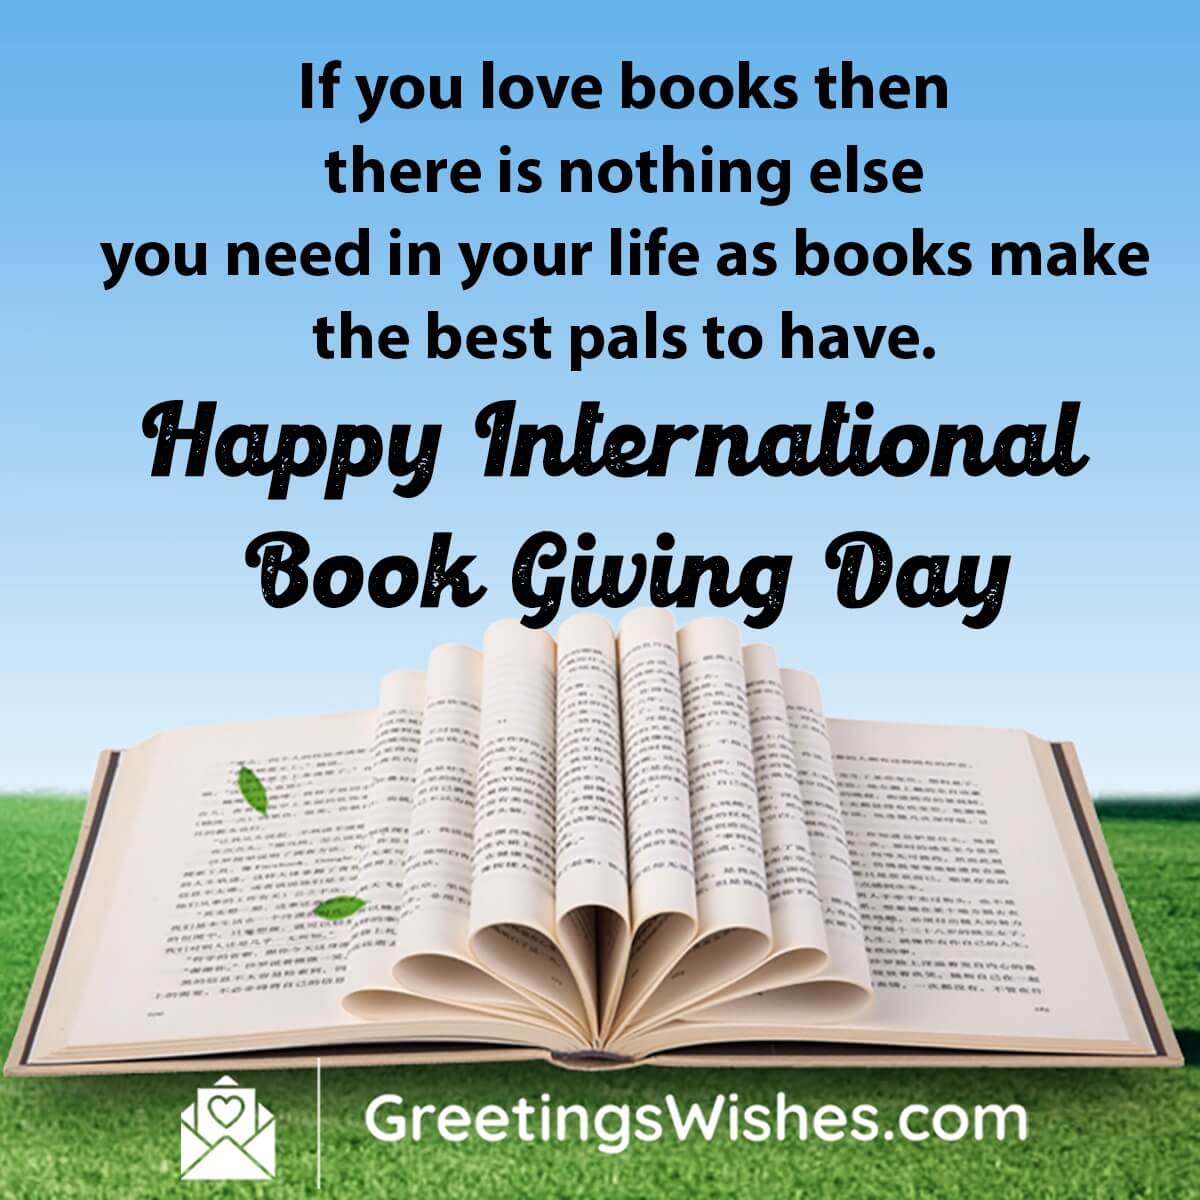 International Book Giving Day Messages